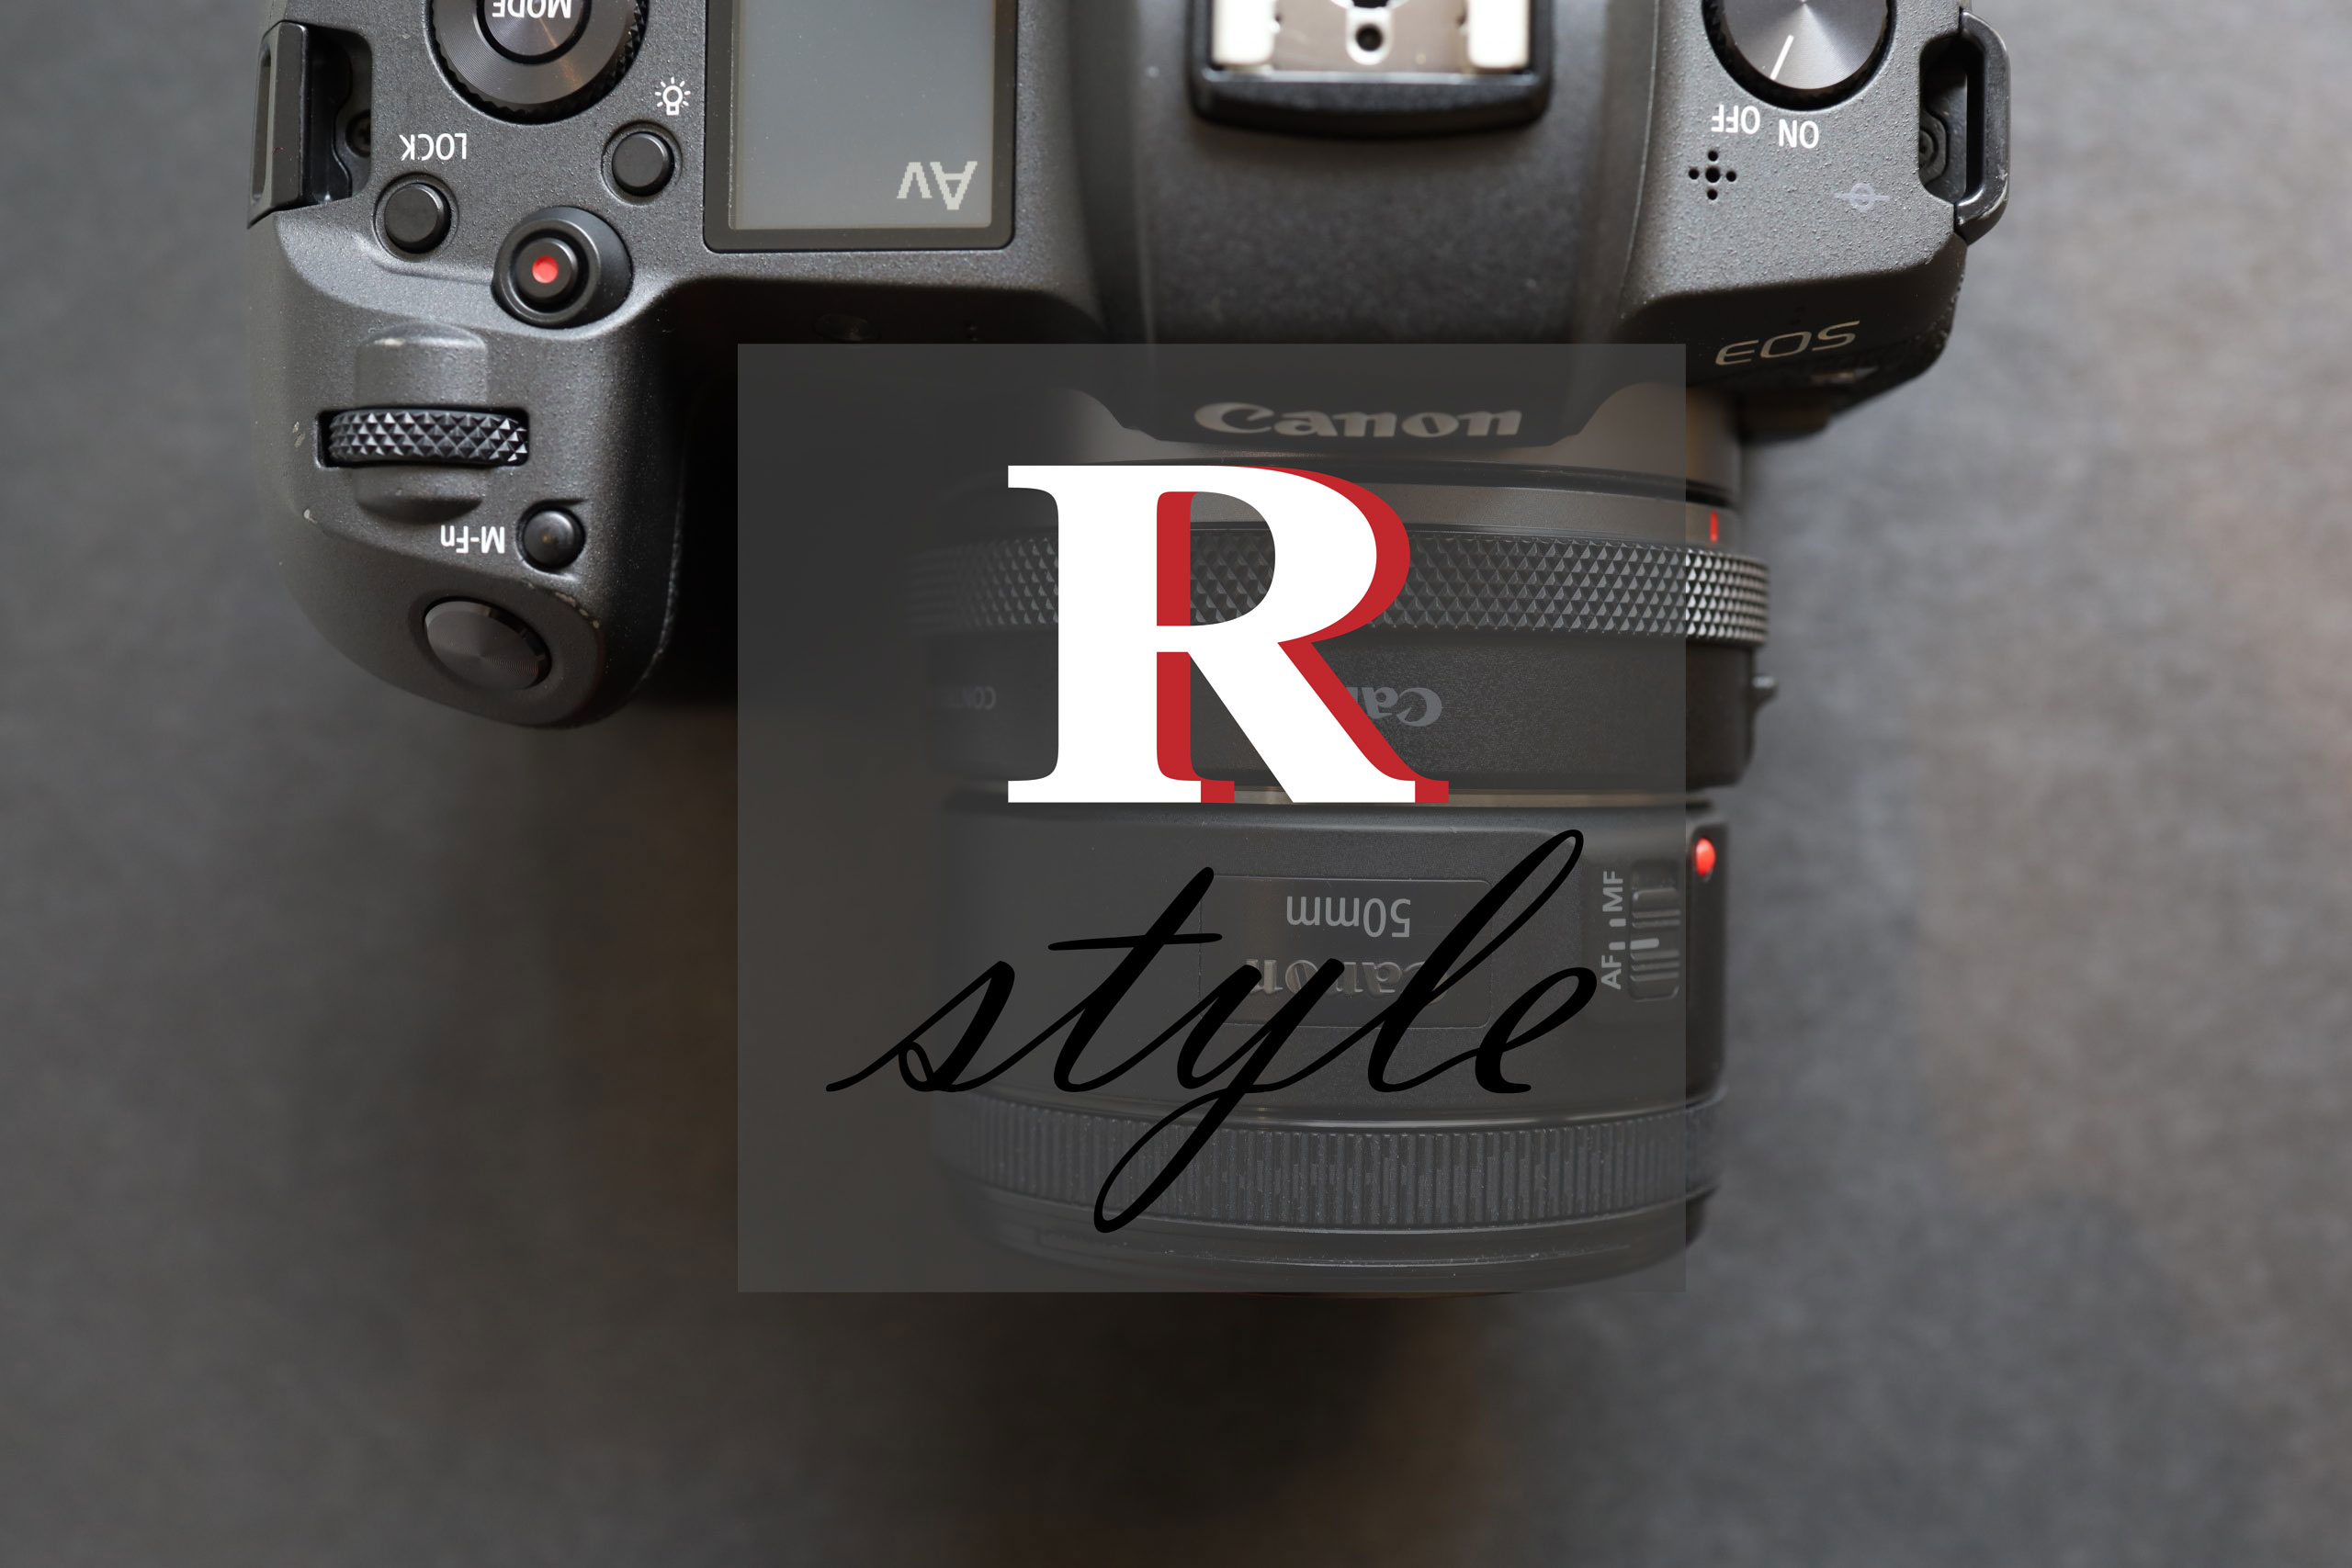 Canon】～R STYLE MIX～EOS R×EF 50mm F1.8 STM | THE MAP TIMES